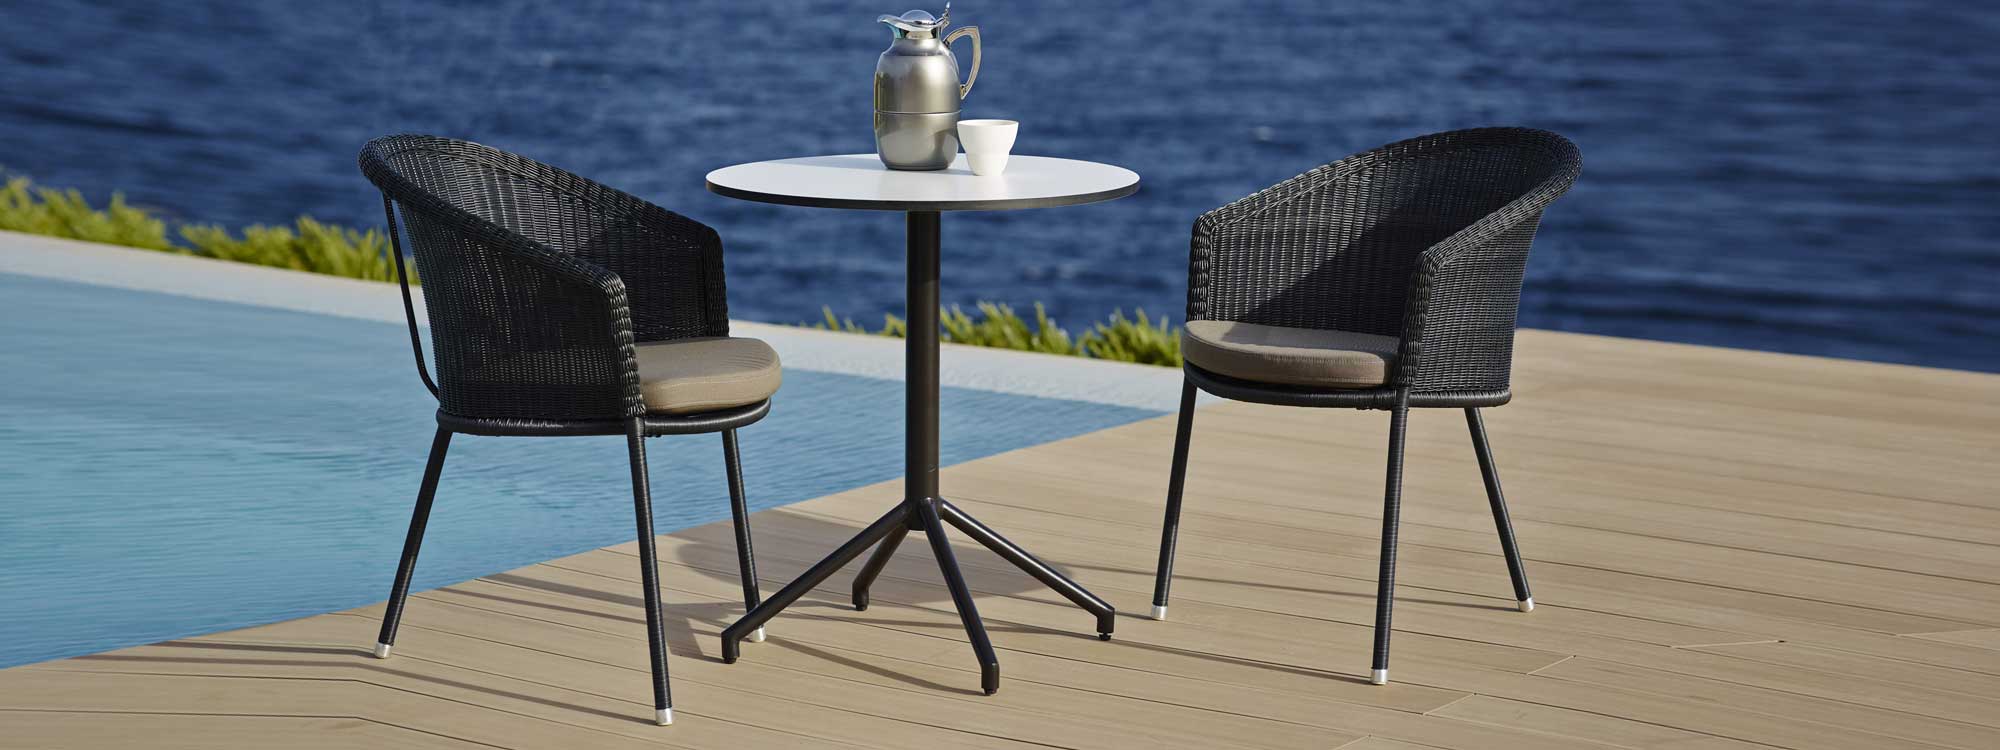 Image of Trinity stacking garden dining chairs by Caneline on wooden decked poolside